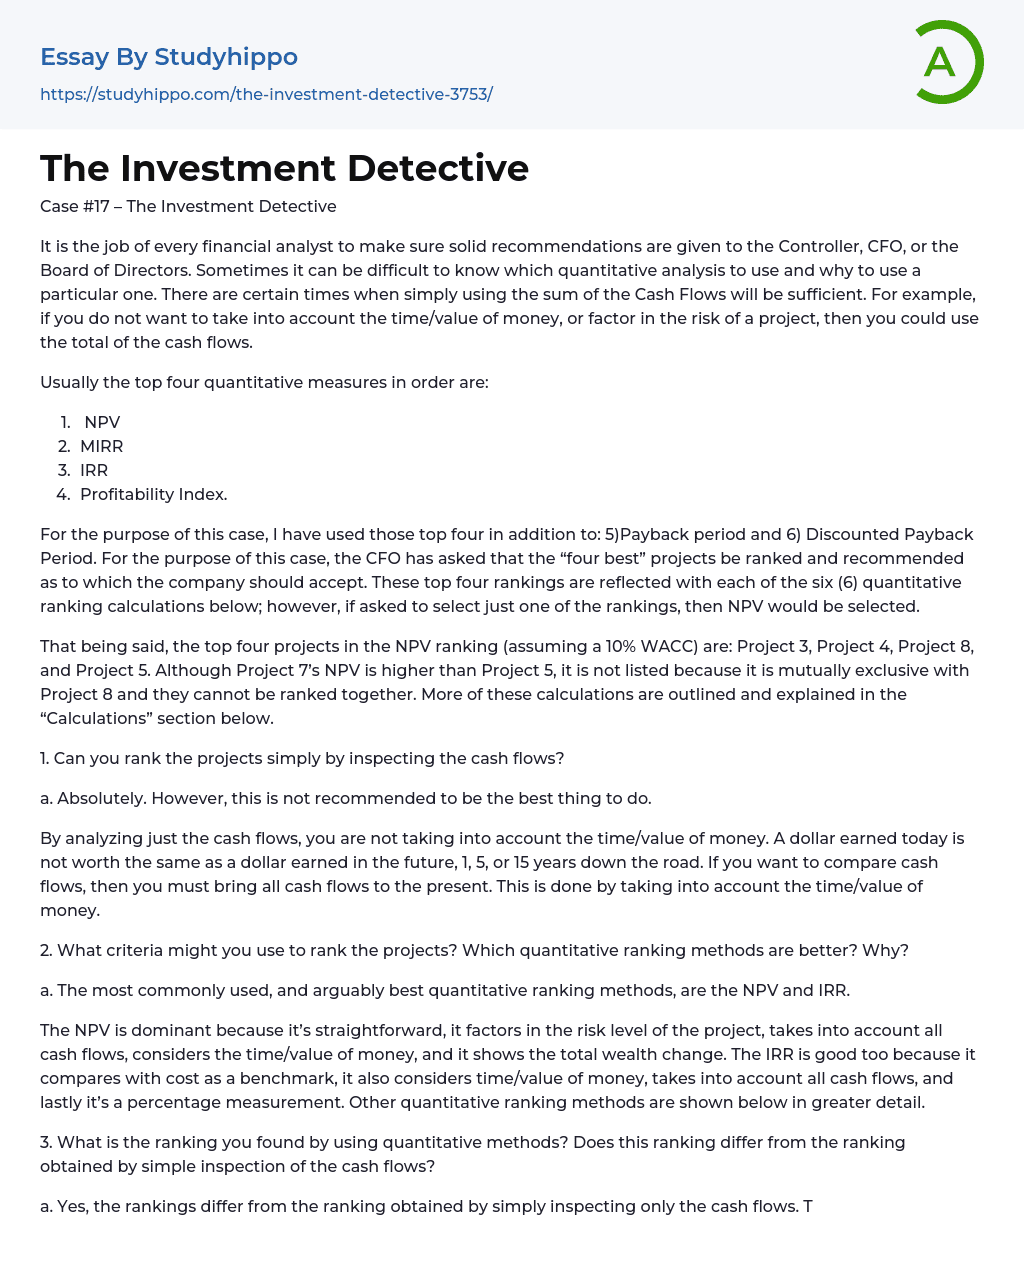 The Investment Detective Essay Example